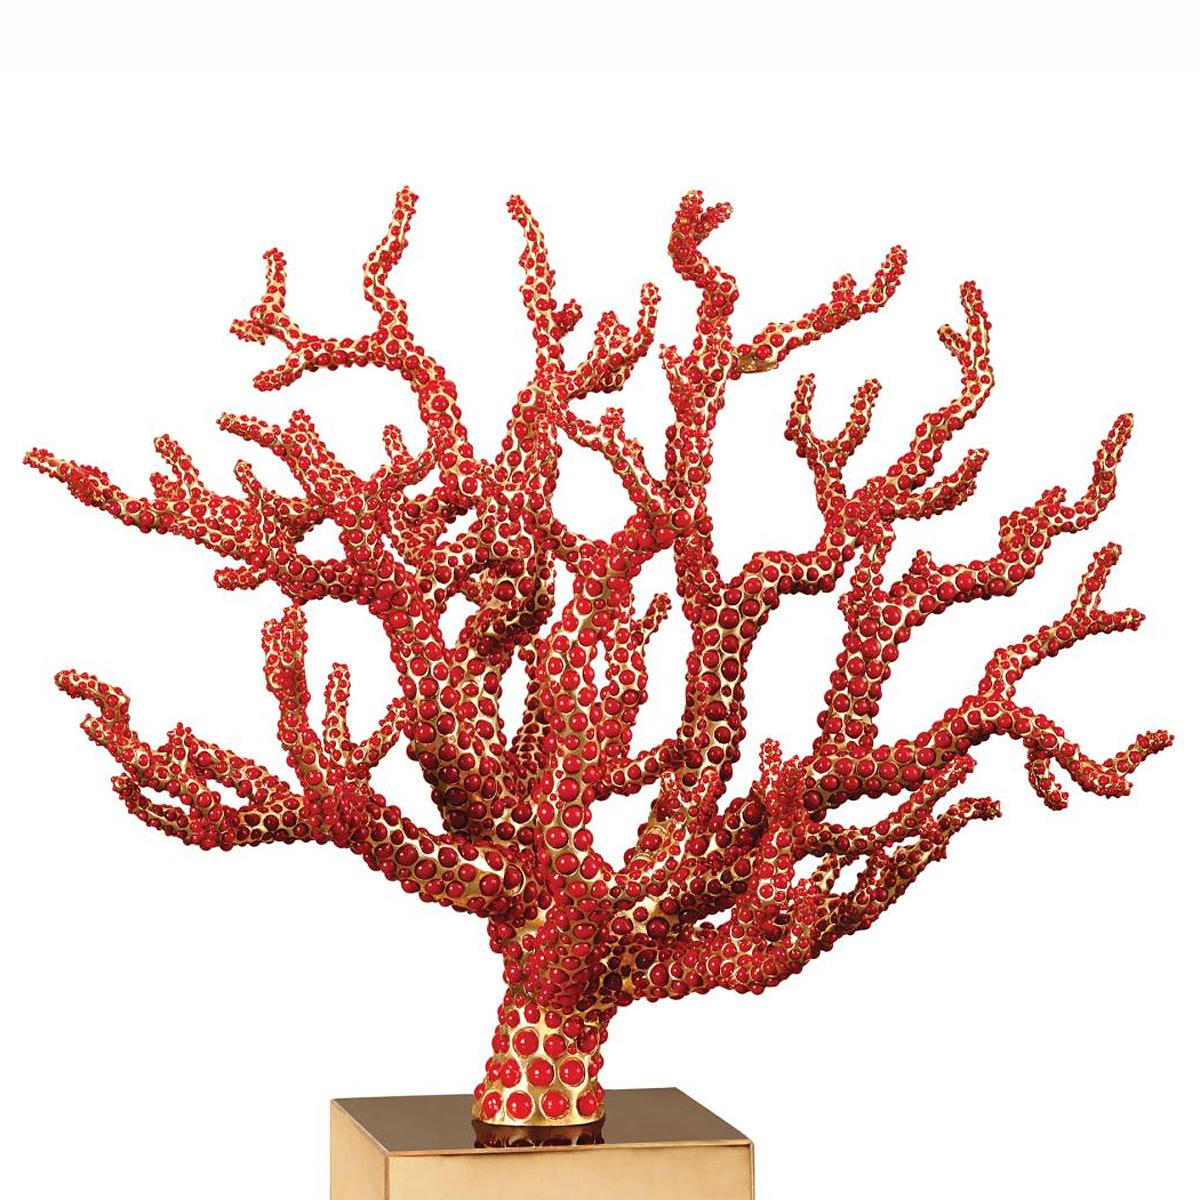 Sculpture red coral handcrafted sculpture
with more than 800 red cabochons hand-placed. 
With structure and base in solid brass gold-plated 
24-karat. Exceptional piece in limited edition.